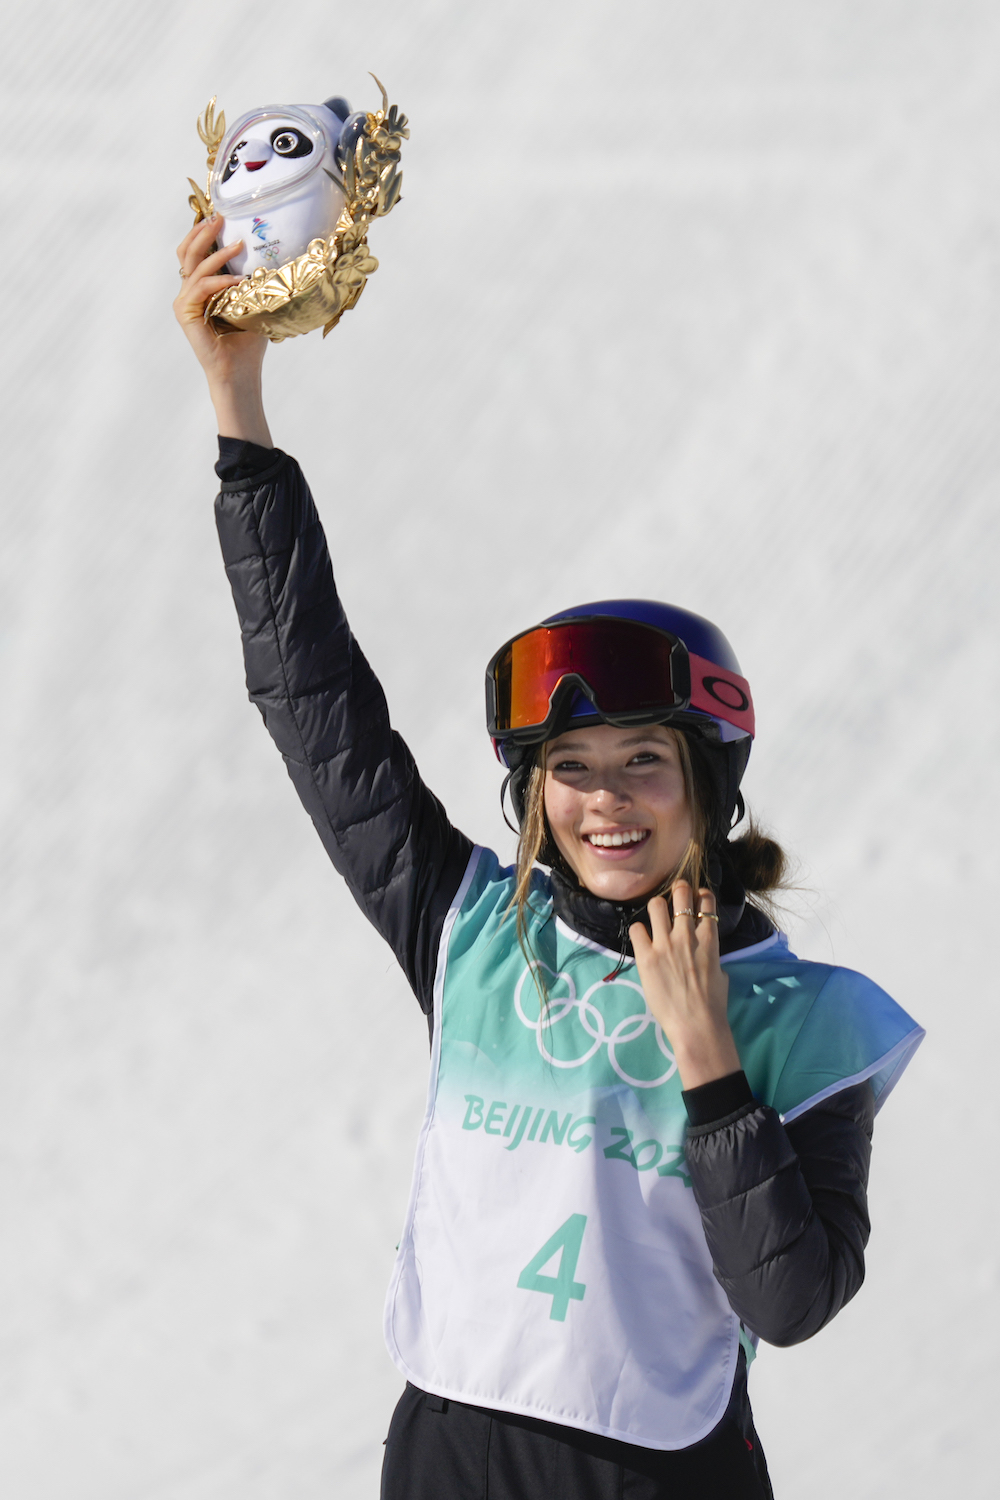 US-Born Skier Eileen Gu, Who Won Gold For China At The Olympics